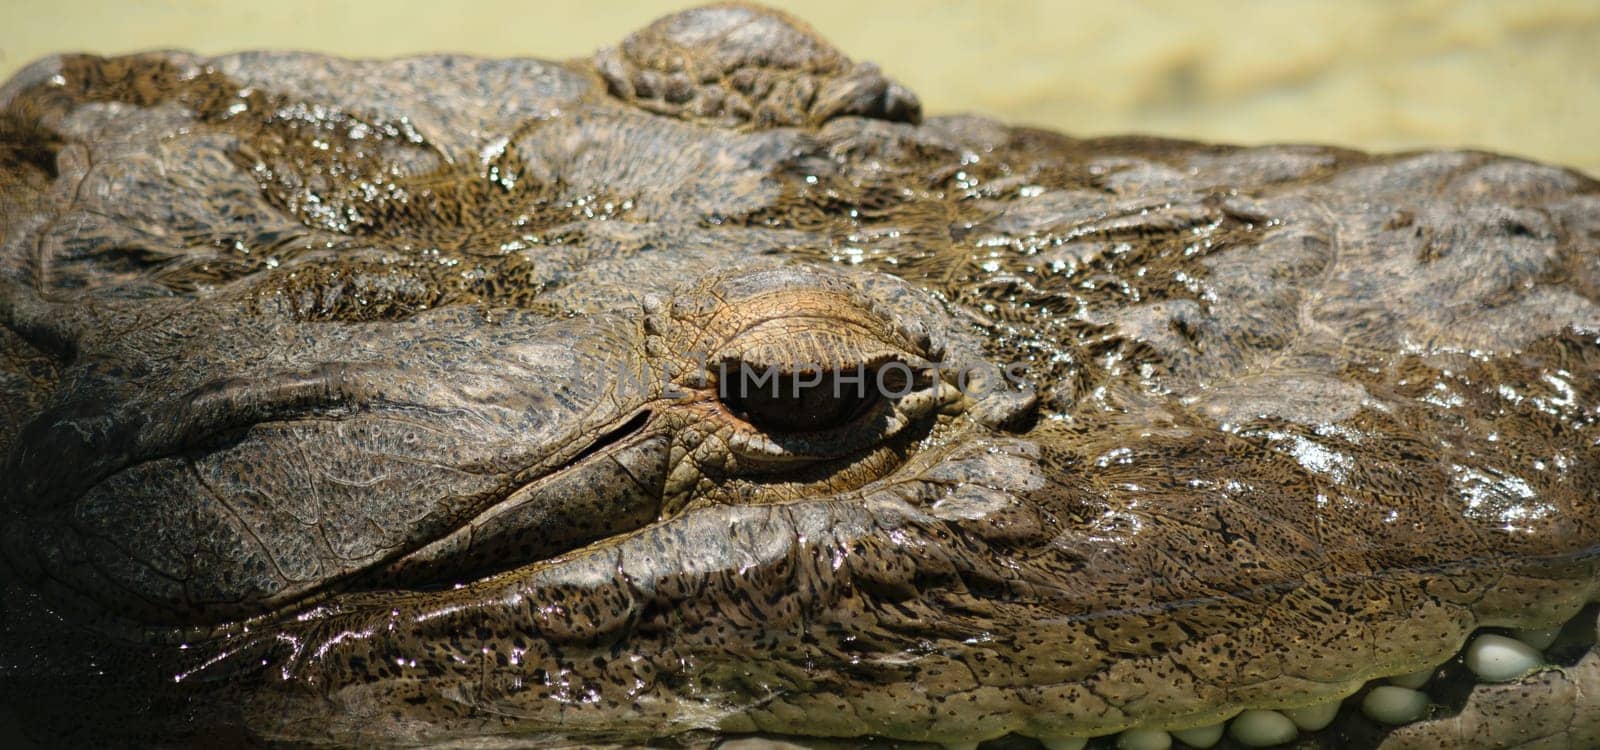 Close-up of a crocodile's head with detailed skin texture and eye visible.